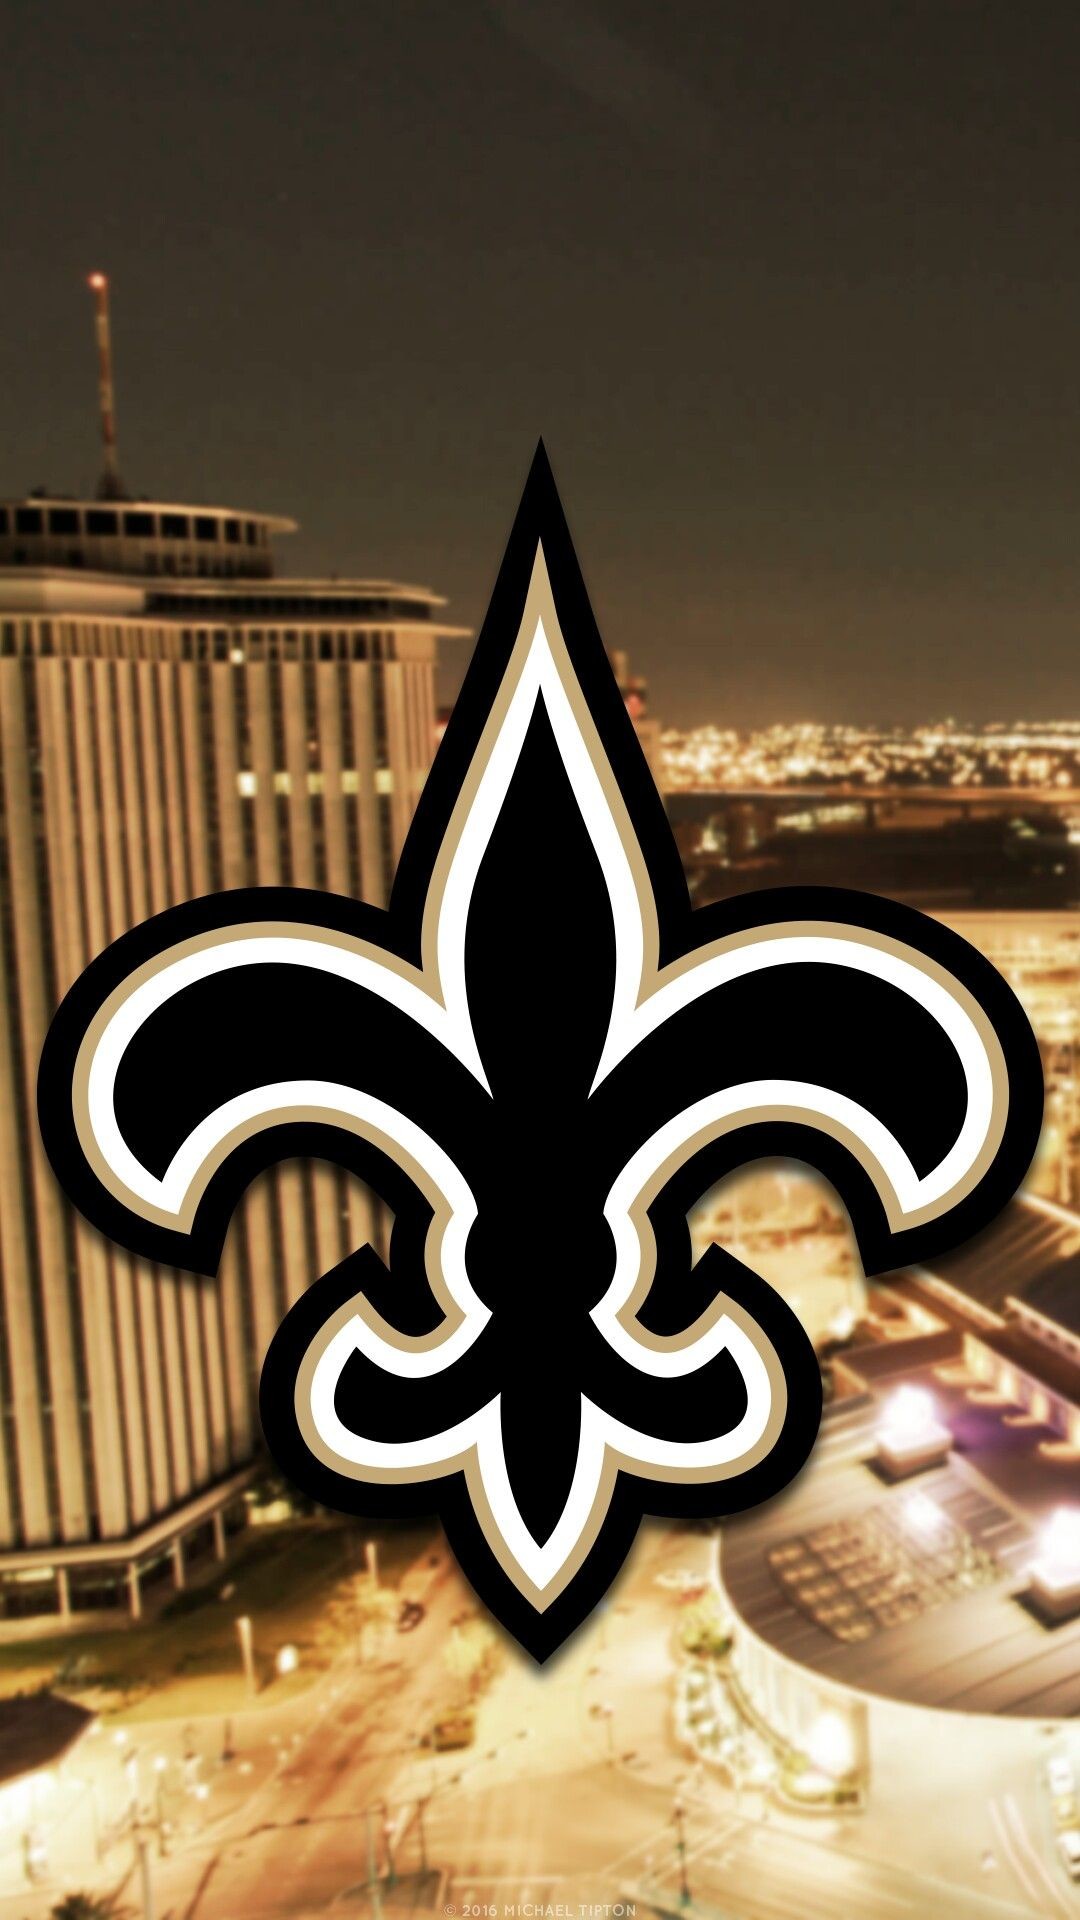 1080x1920 New Orleans Saints IPhone & Android Wallpaper.